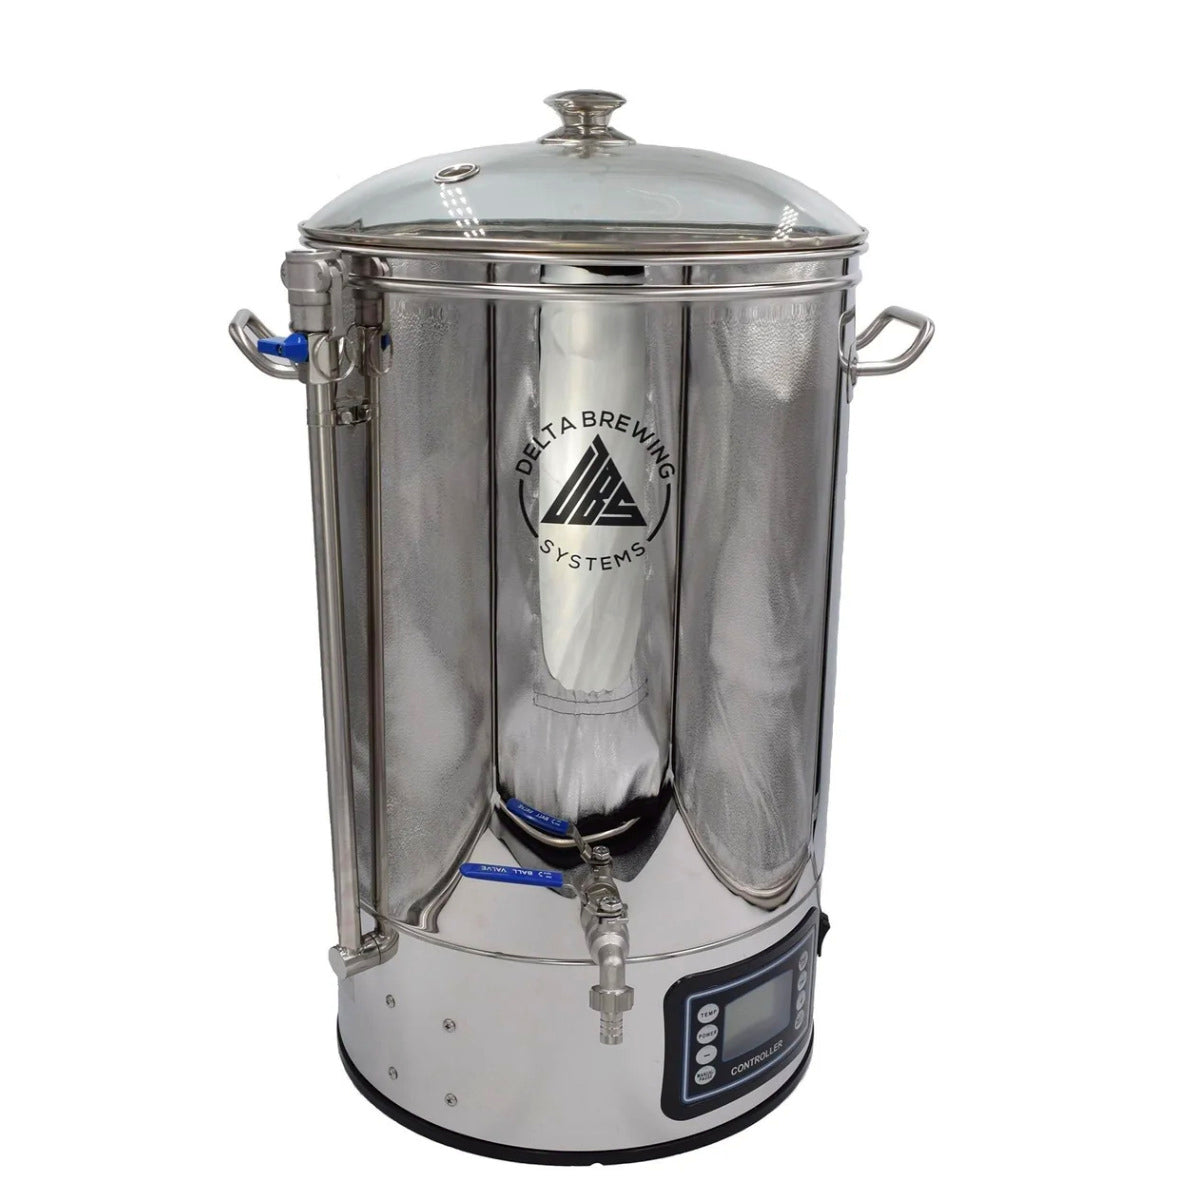 All in one homebrewing system